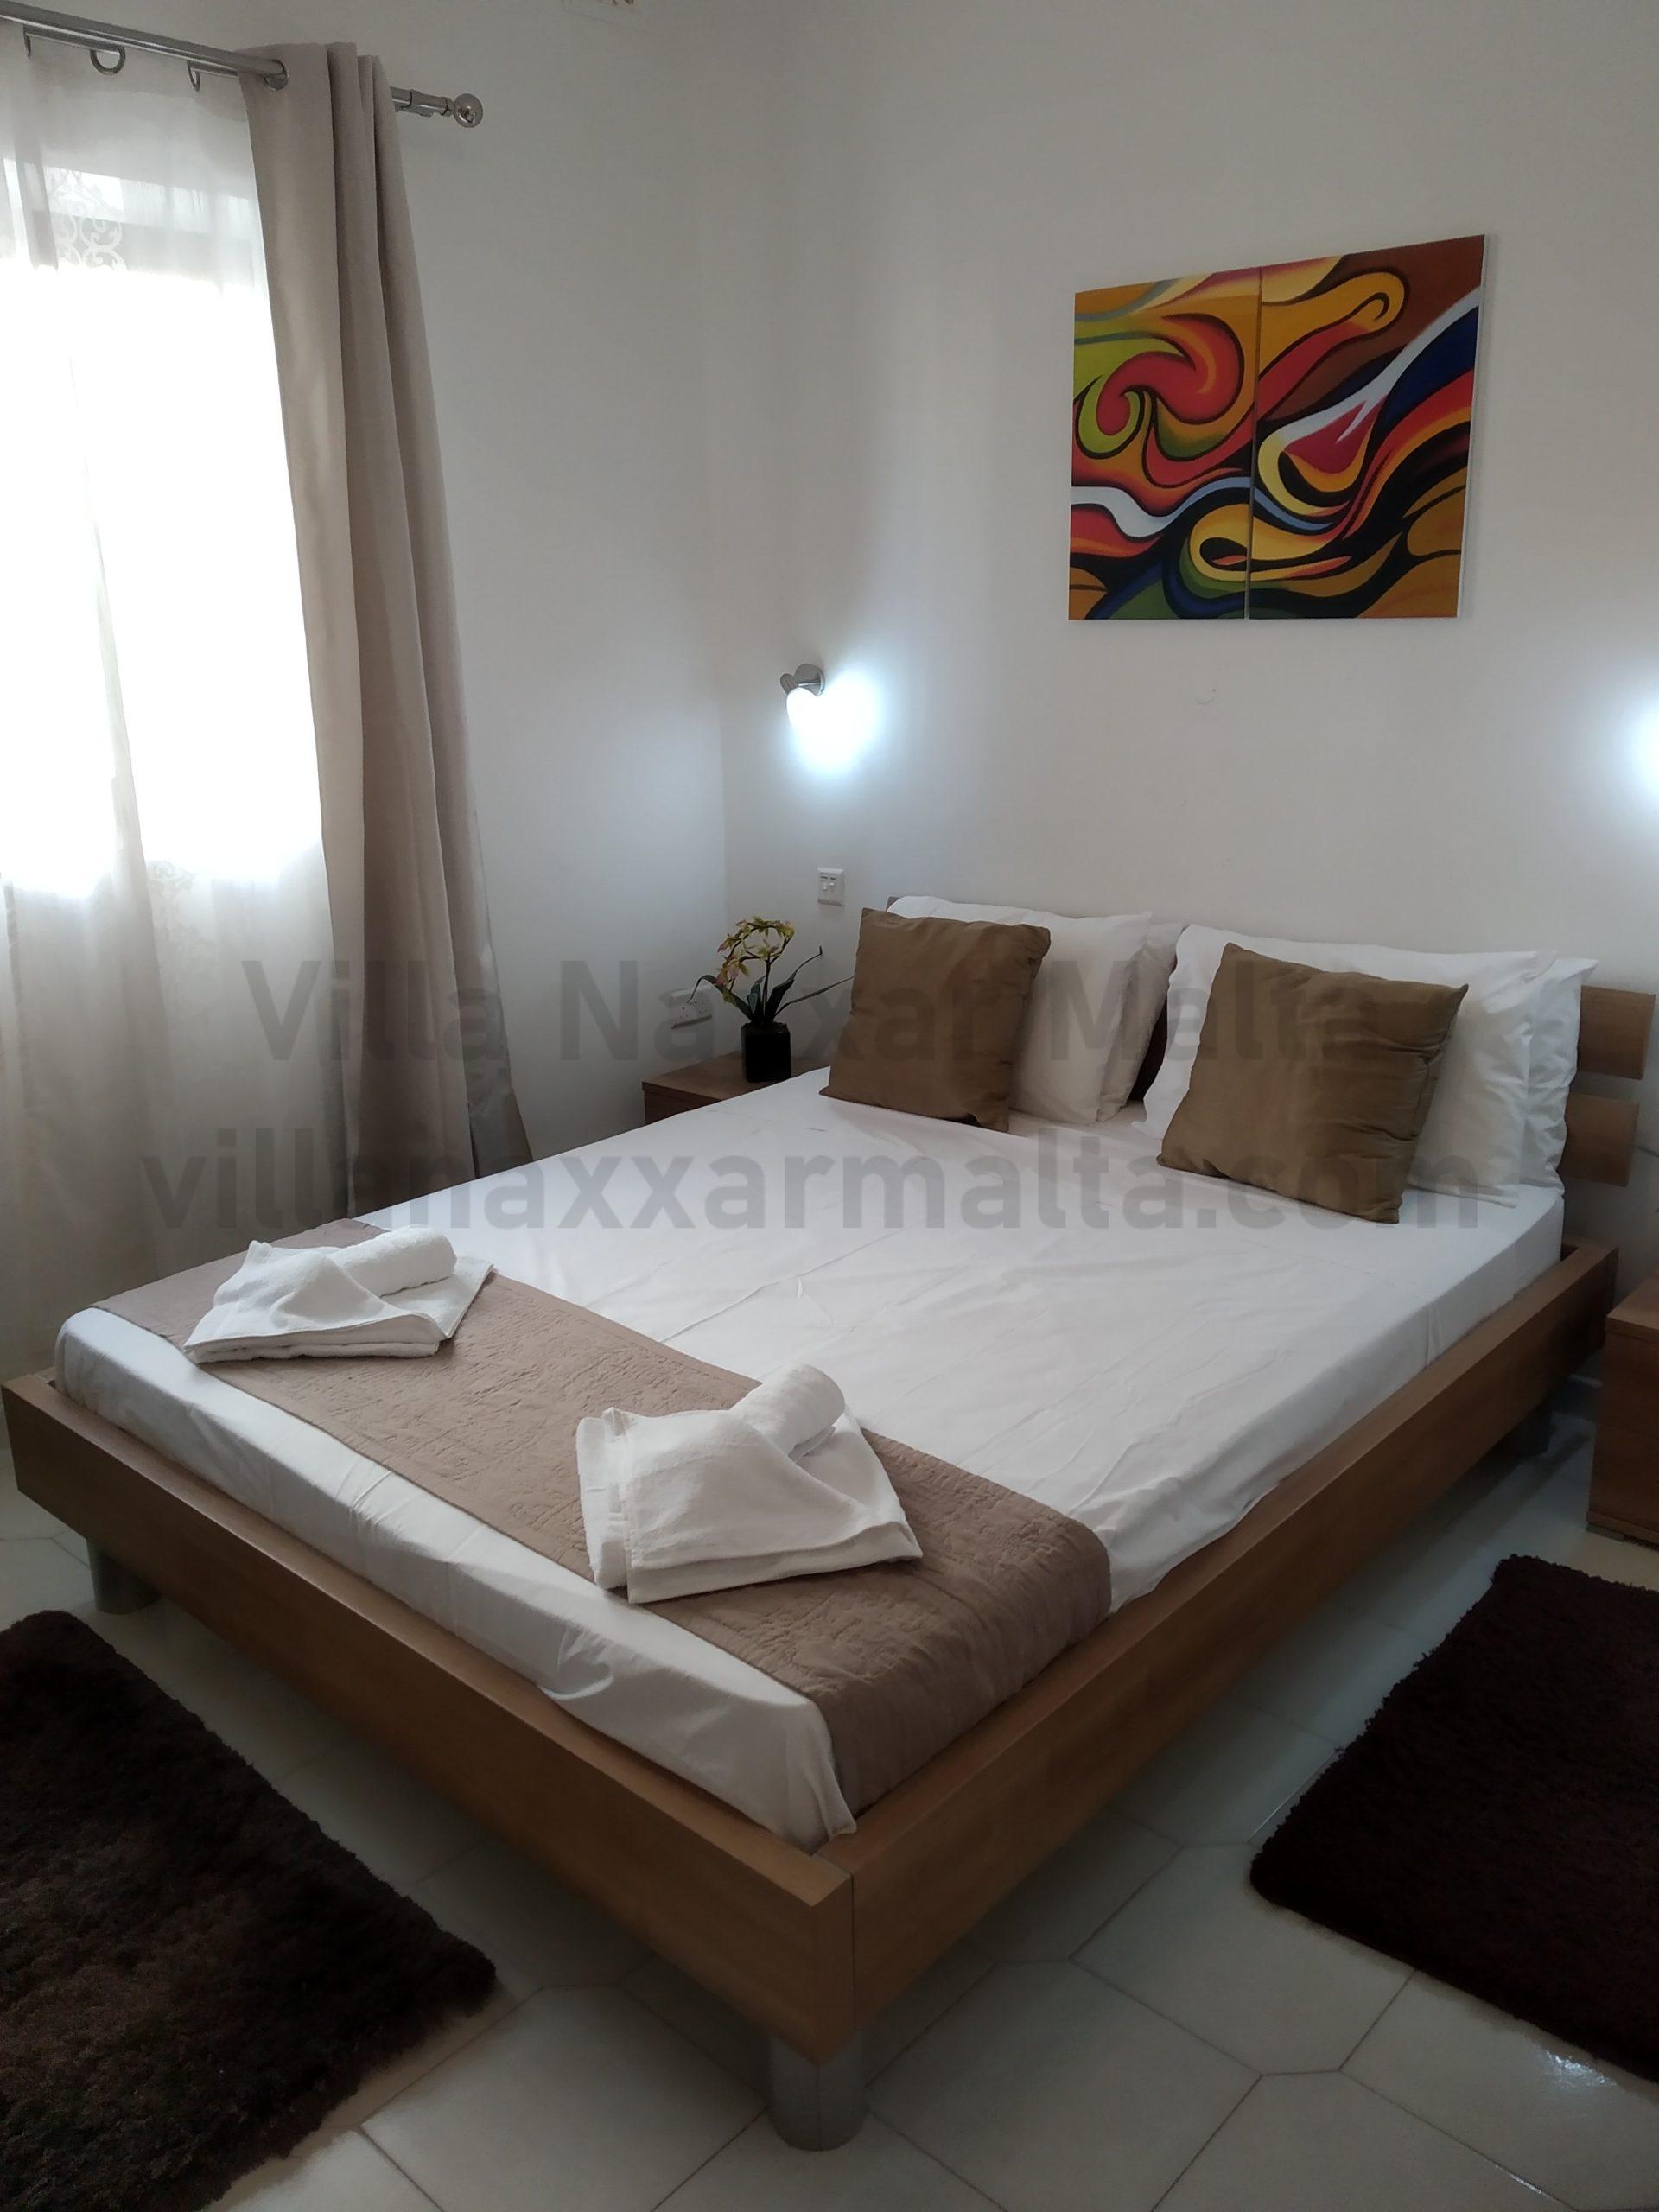 Villa Naxxar Malta – Third Bedroom (double Bed) with large wardrobes, AC, WIFI and more ... space for additional beds